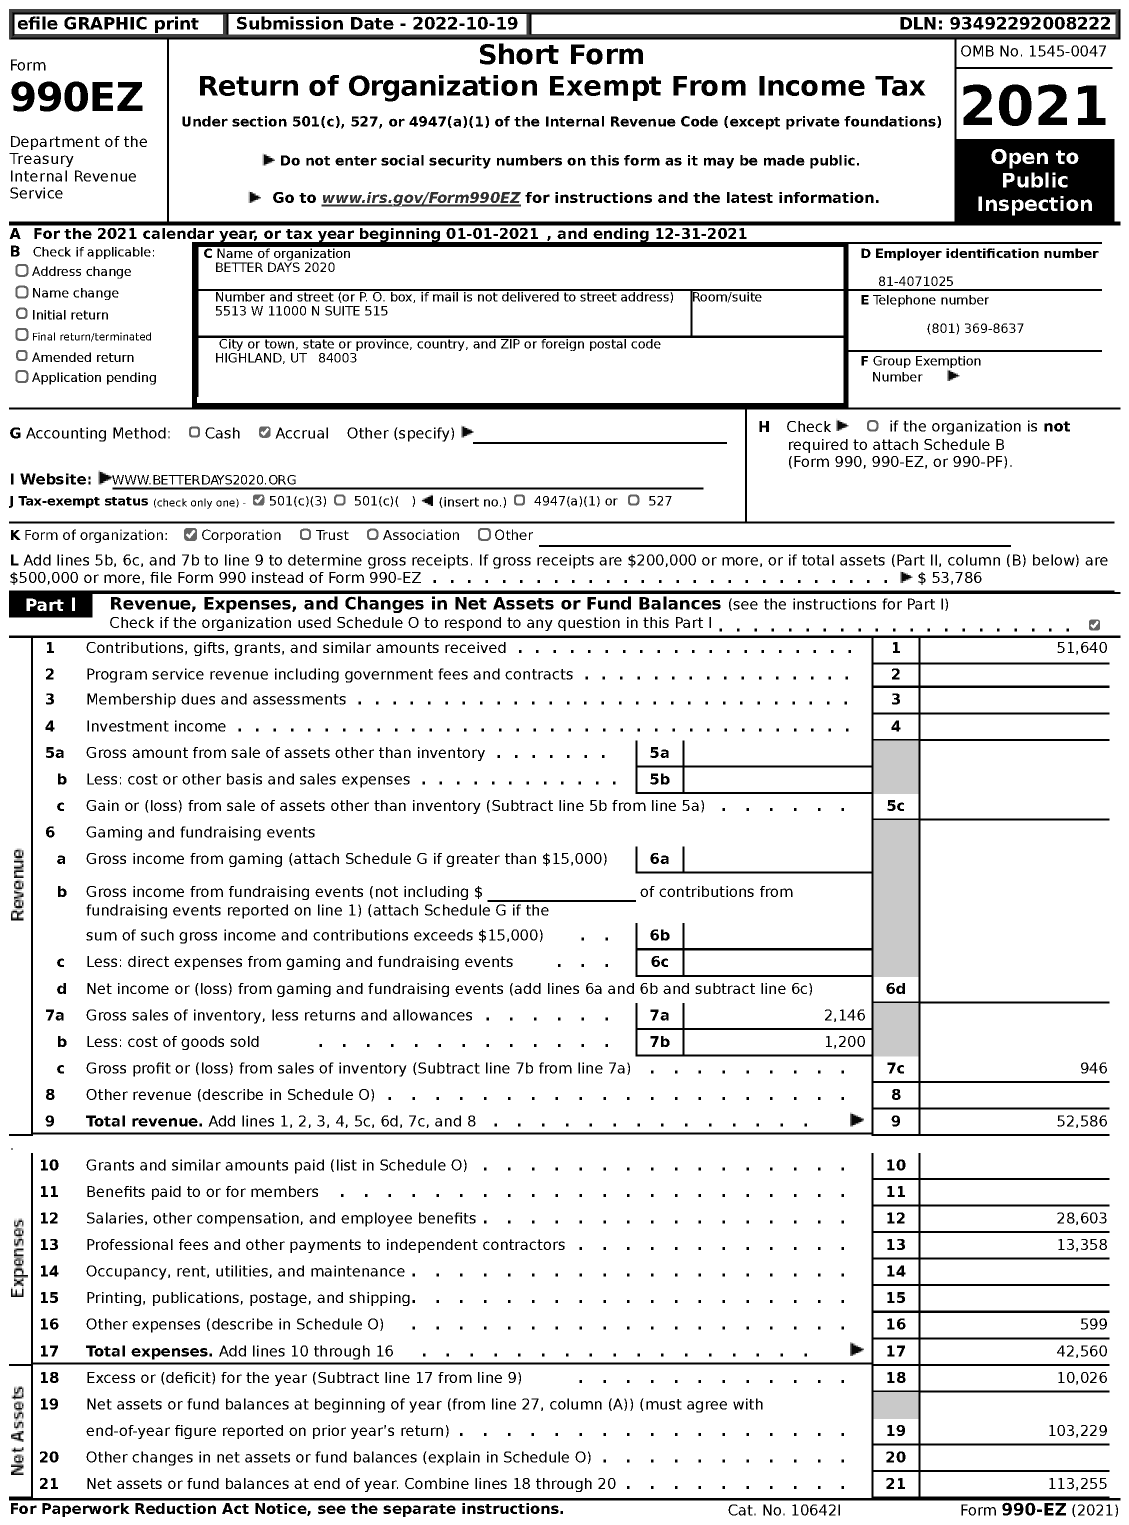 Image of first page of 2021 Form 990EZ for Better Days 2020